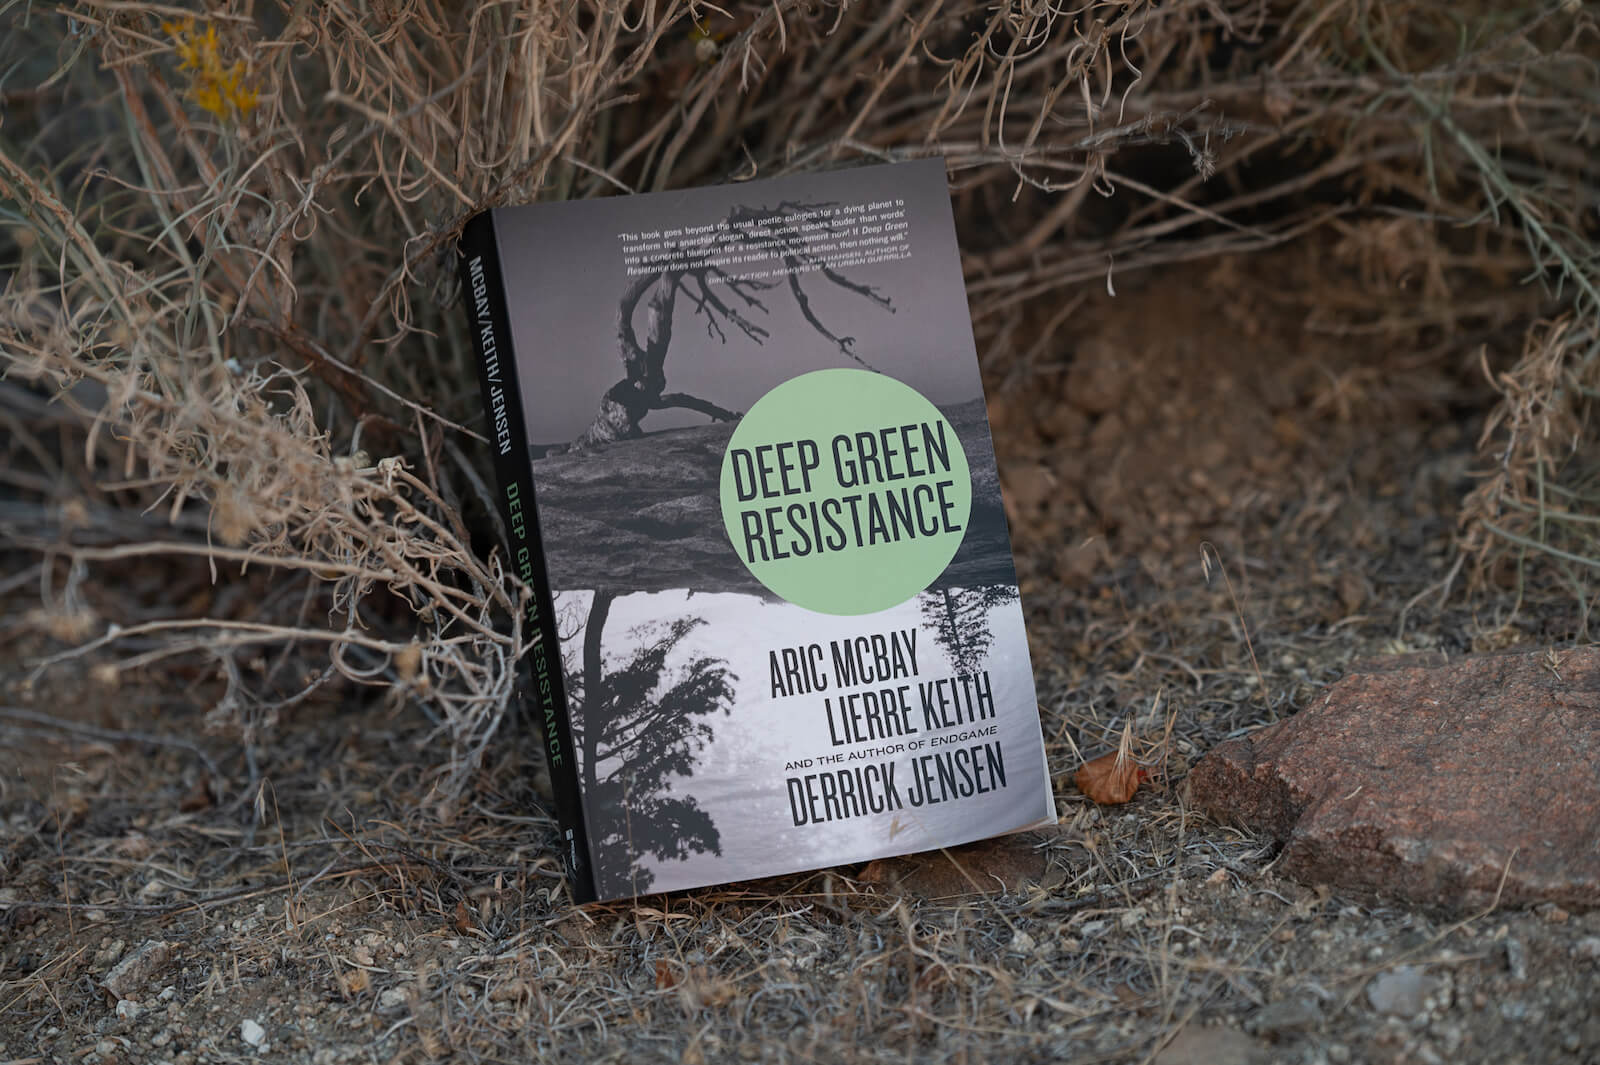 What is Deep Green Resistance?